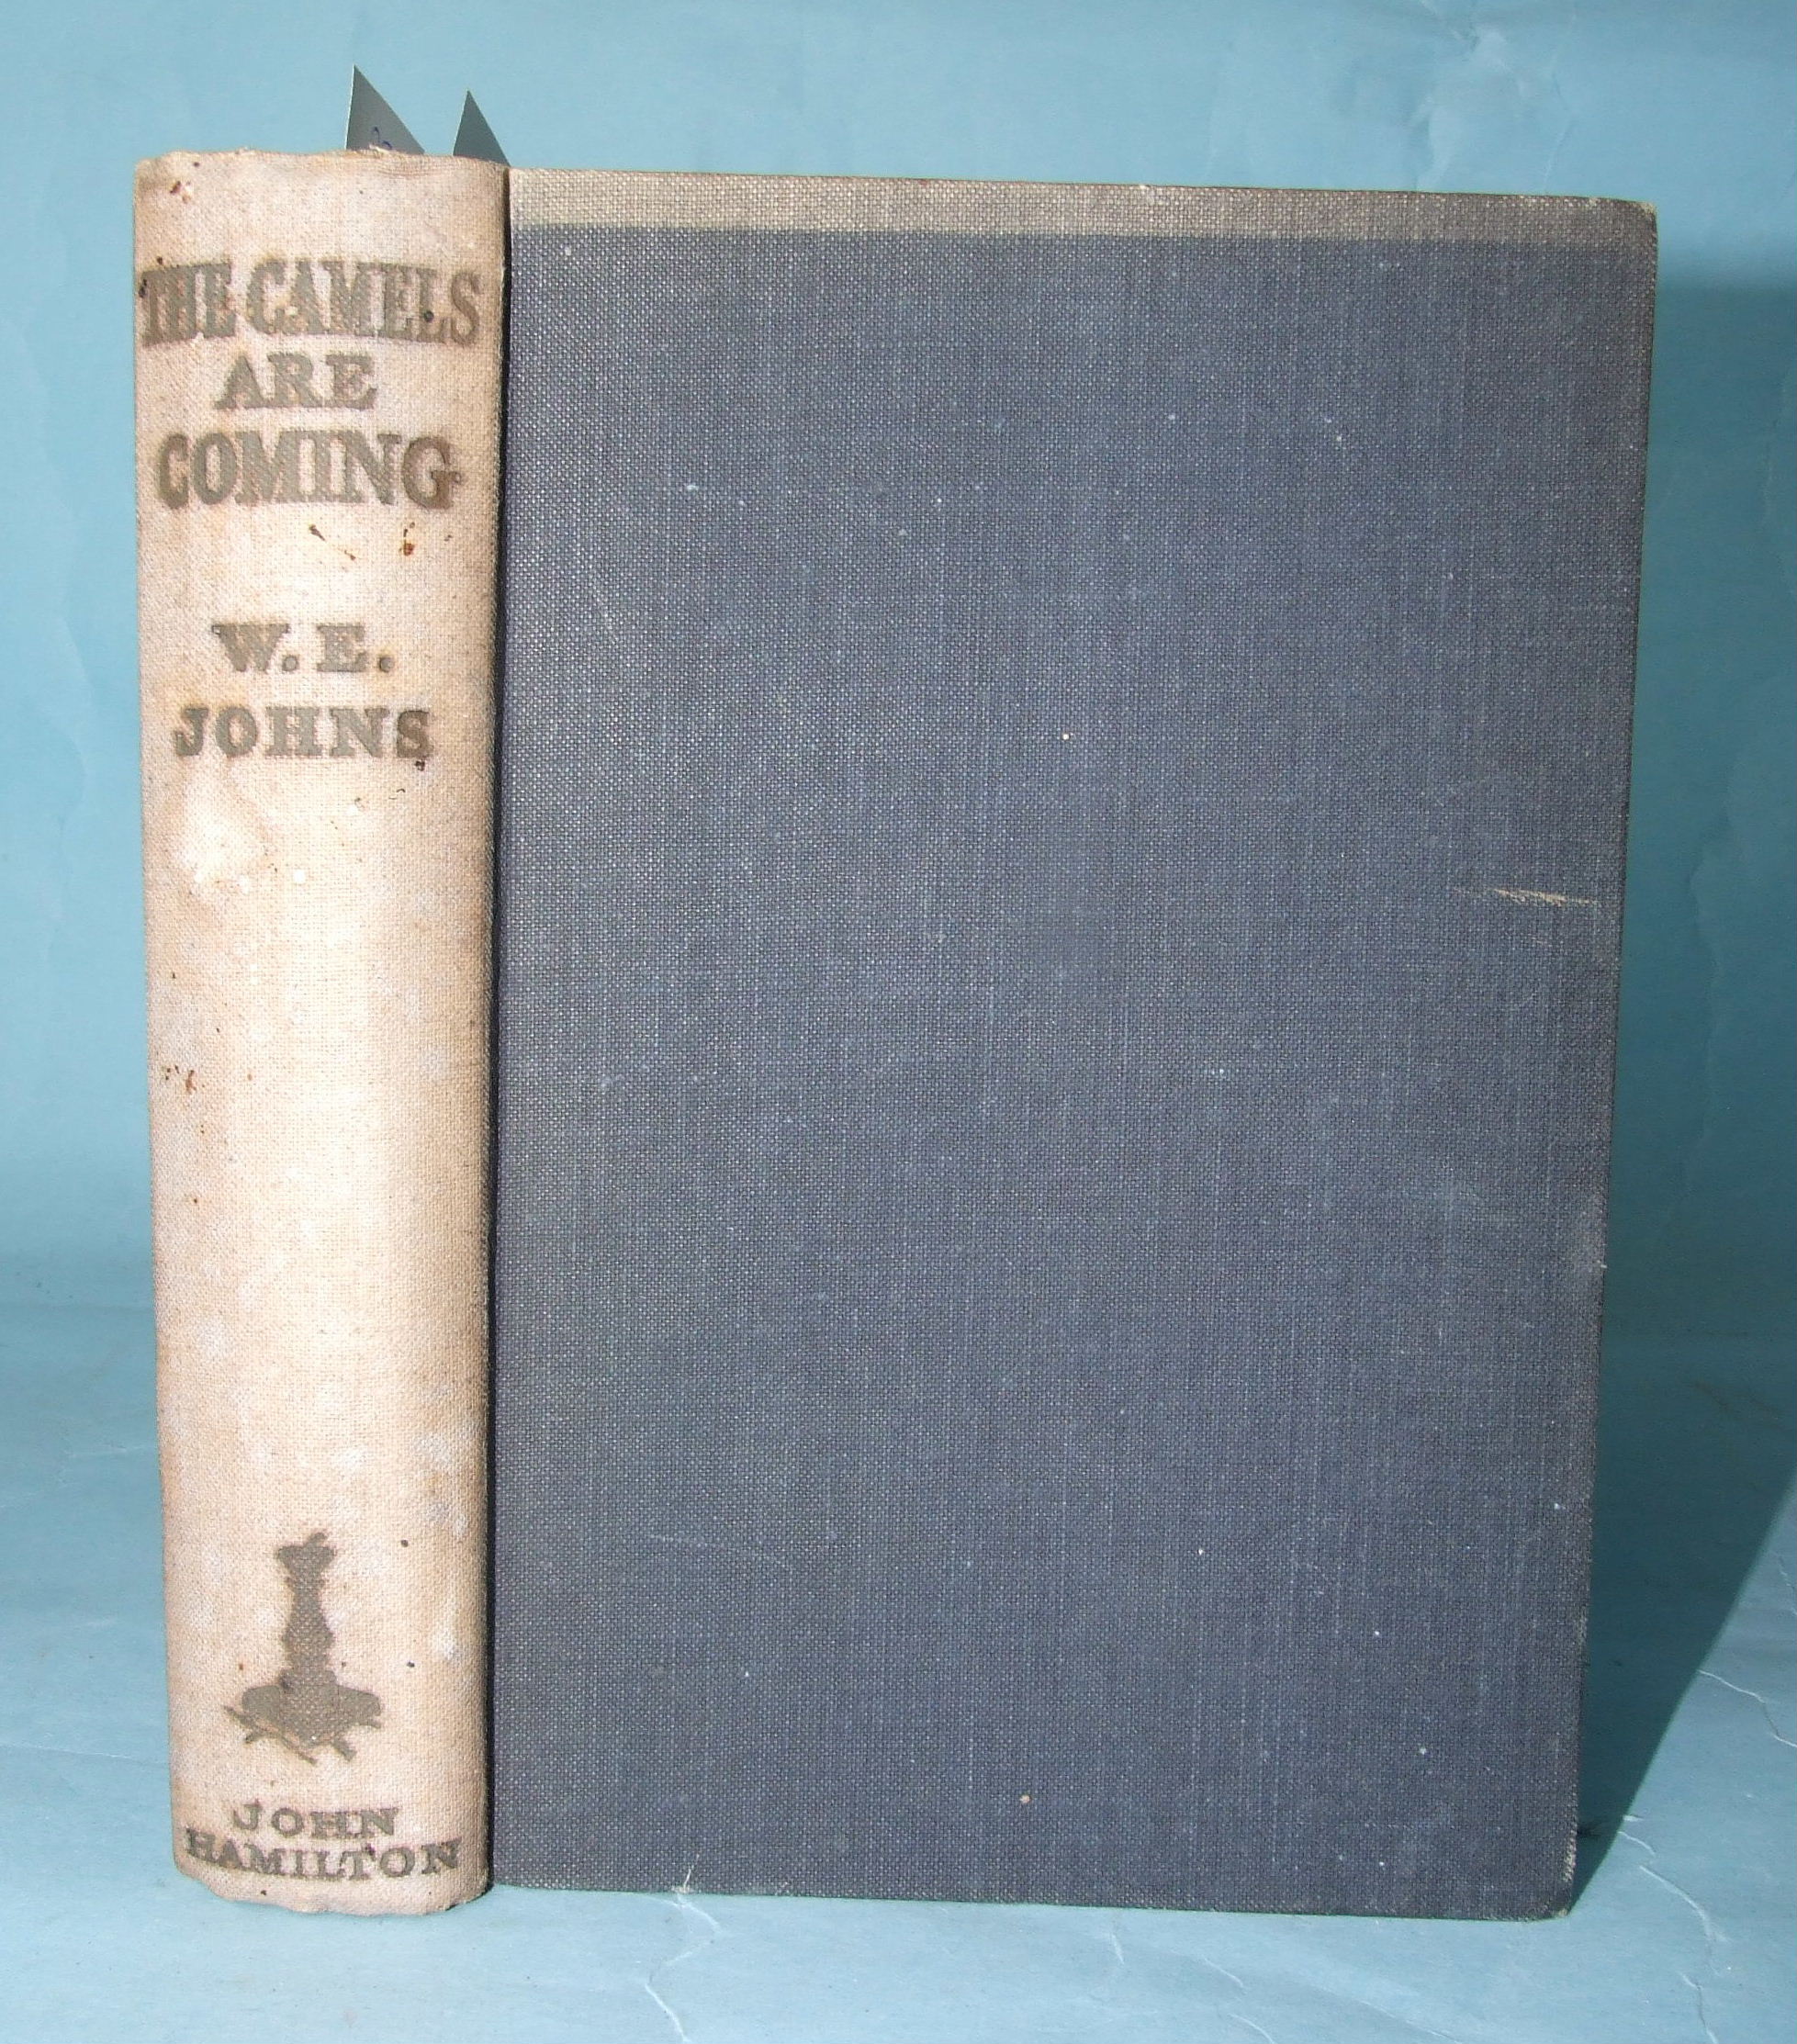 Johns (Capt. WE), The Camels are Coming, 3rd edn, no dwrp, illus, spring 1933 Sundial Editions